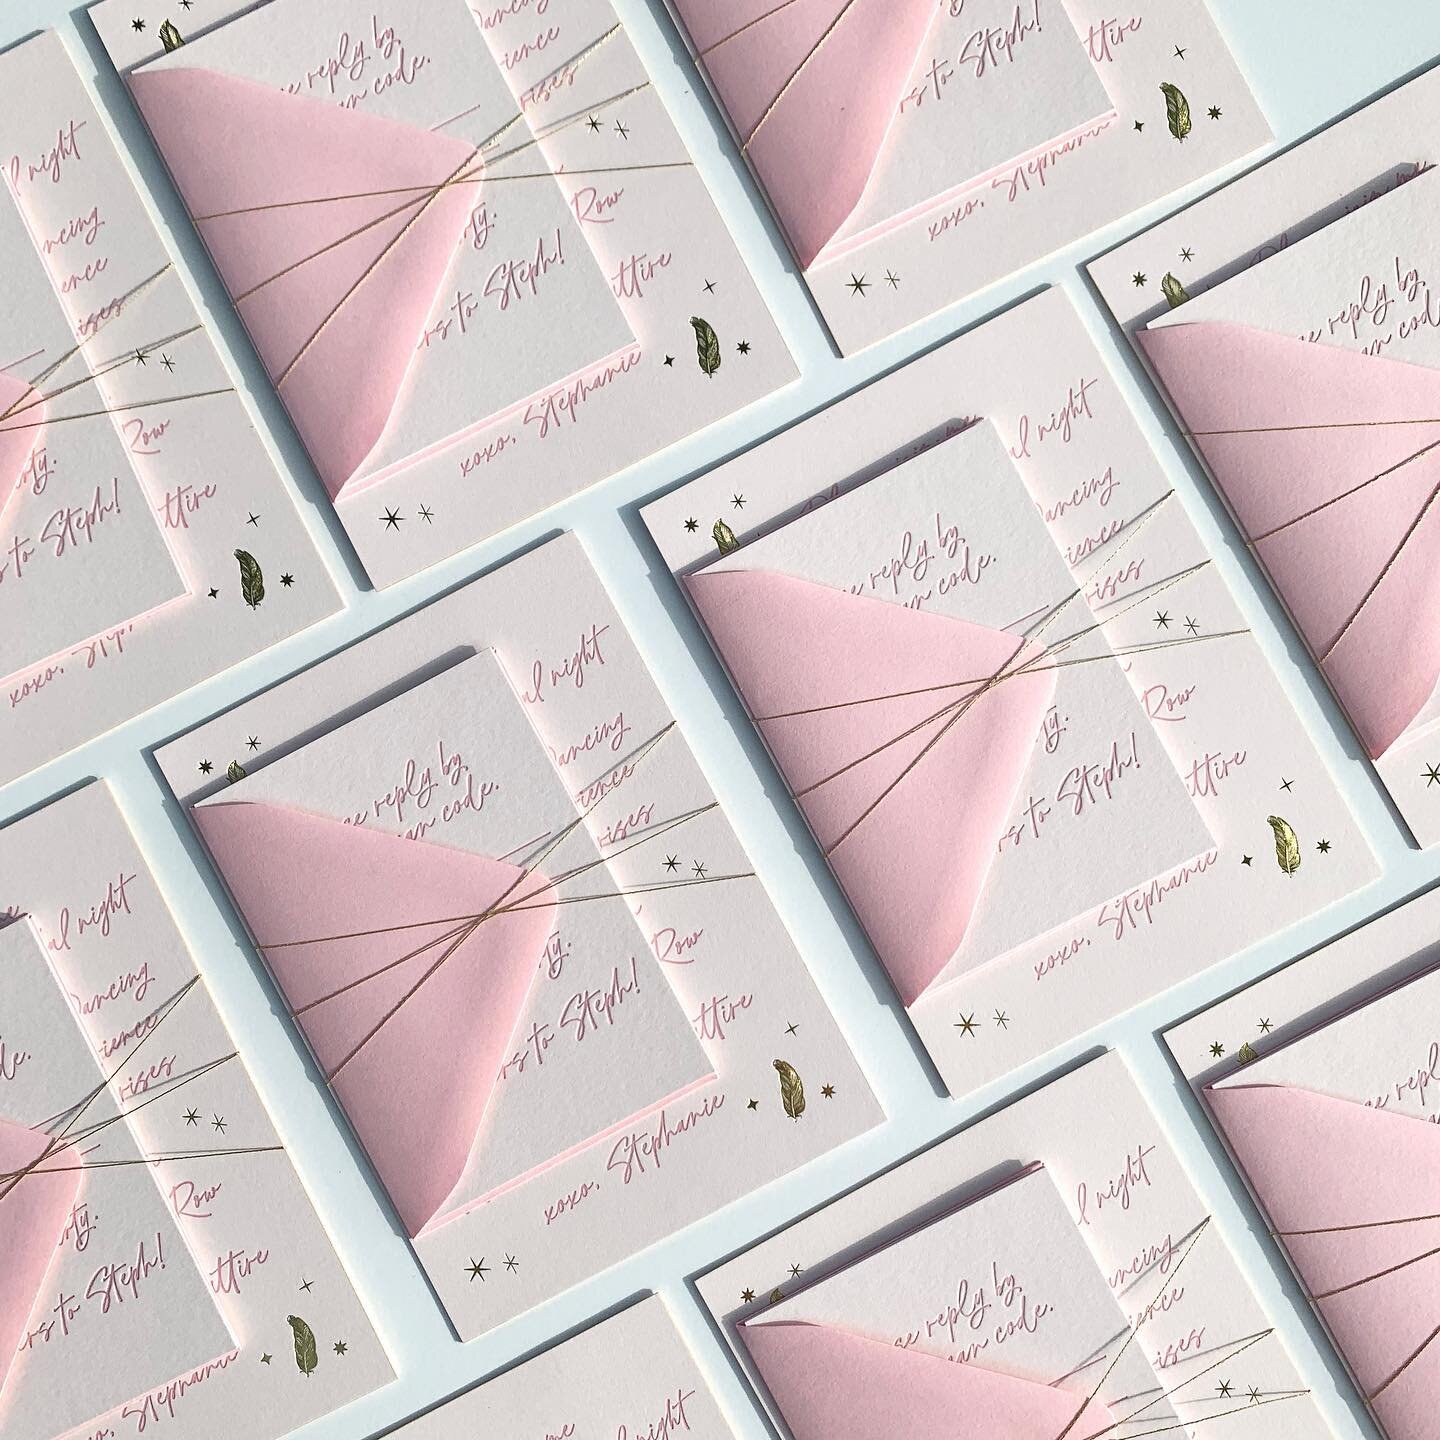 Think Pink 💗
&bull;
Pillowy cotton paper, pink letterpress, gold foil, hand-painted gold edges, hot pink handwriting and vintage Oscar de la Renta postage. All of the pretty, sparkly details were must-haves for this stylish milestone soir&eacute;e d